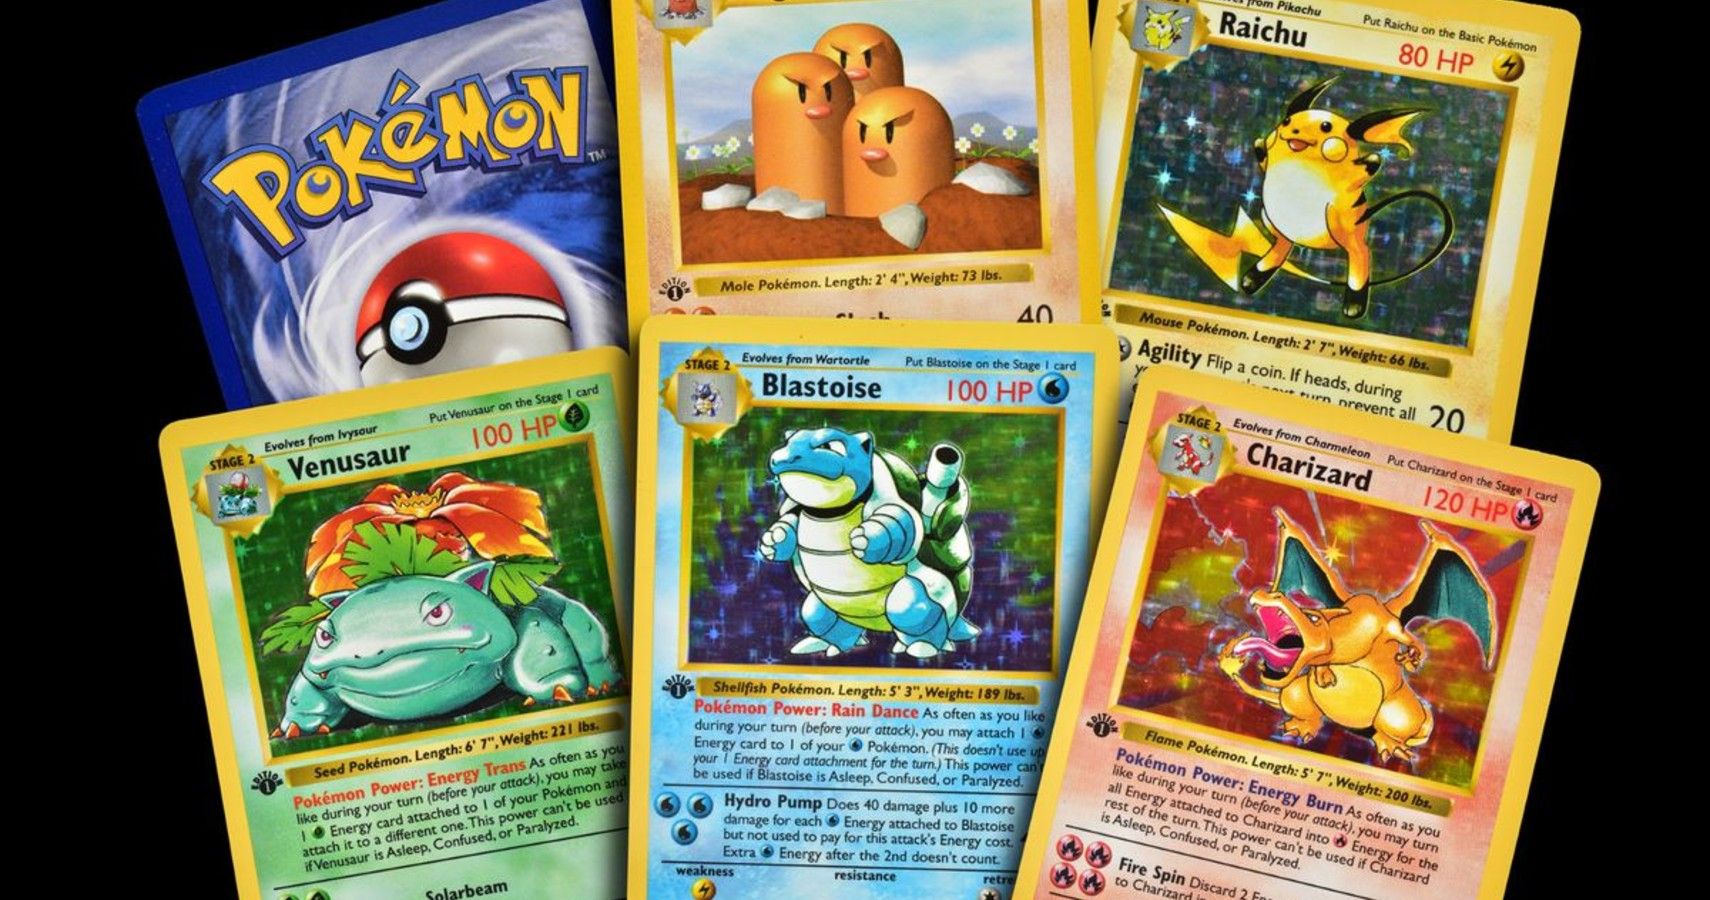 1st Edition Set Of Pokemon Cards Including A Charizard Sells For $666000